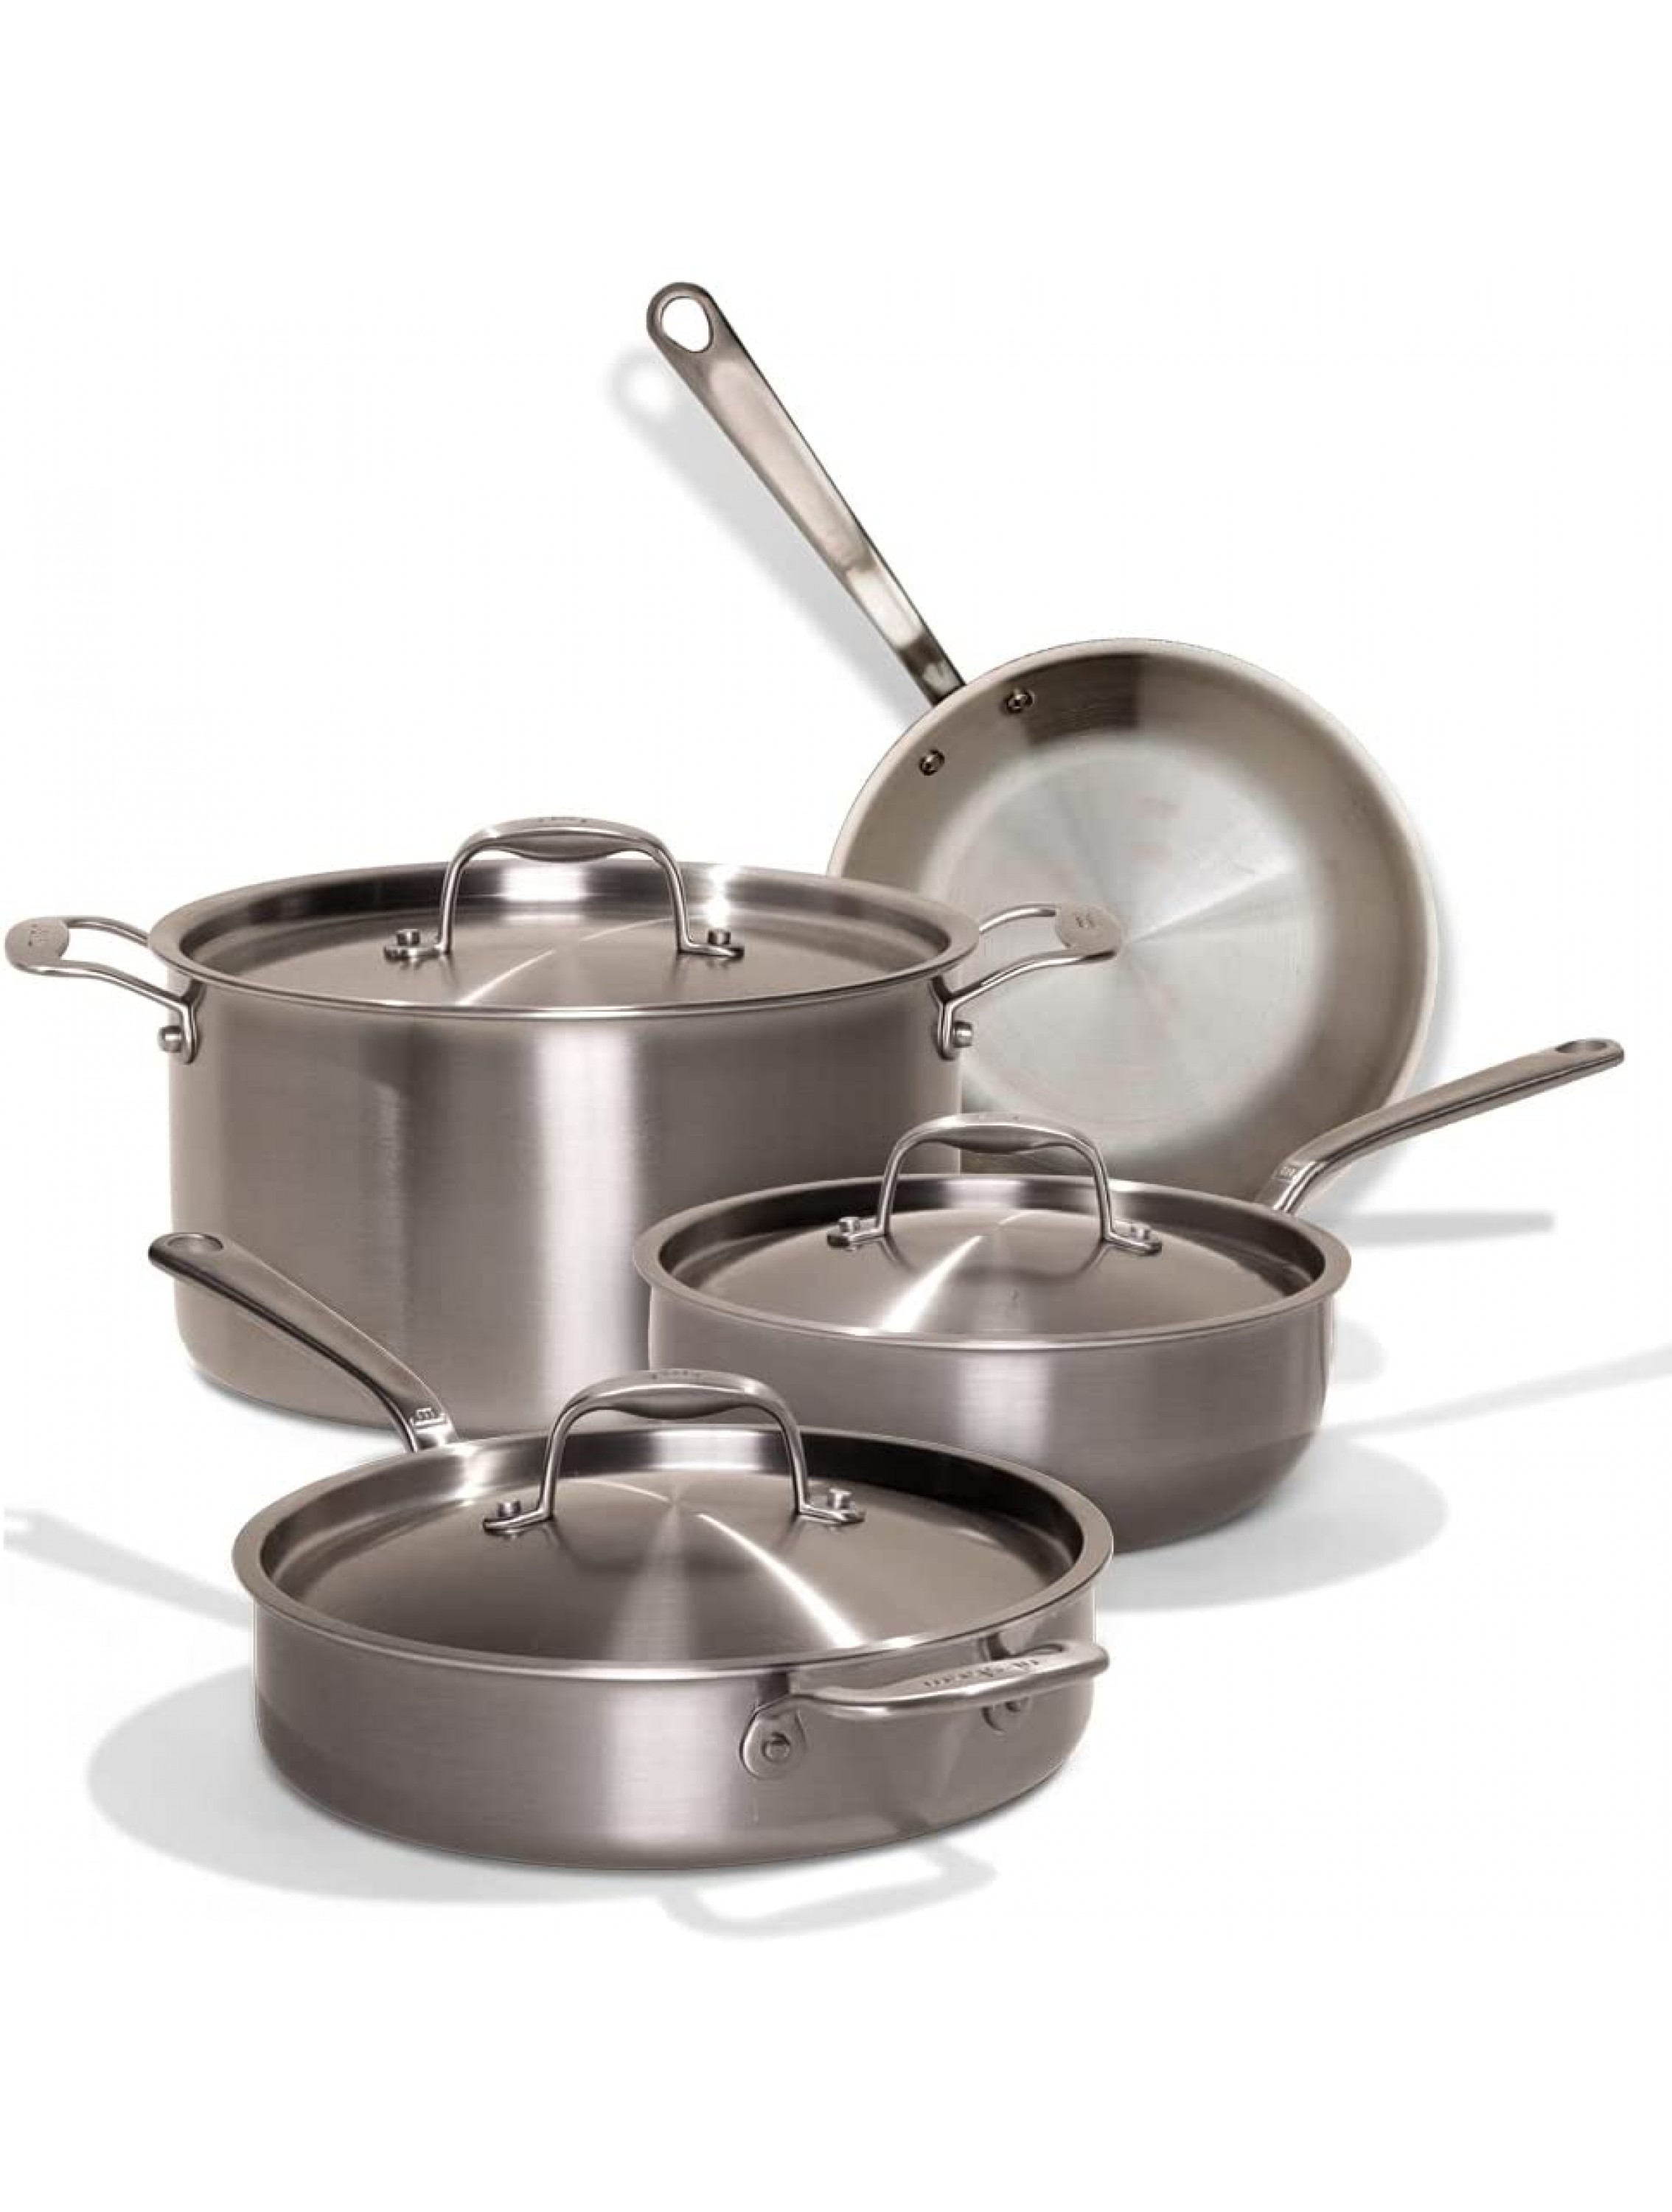 Made In Cookware 7 Piece Stainless Steel Pot and Pan Set 5 ply Stainless Clad Includes Frying Pans Saucepans Saute Pan and Stock Pot Induction Compatible Cookware - B6UBFDRBN